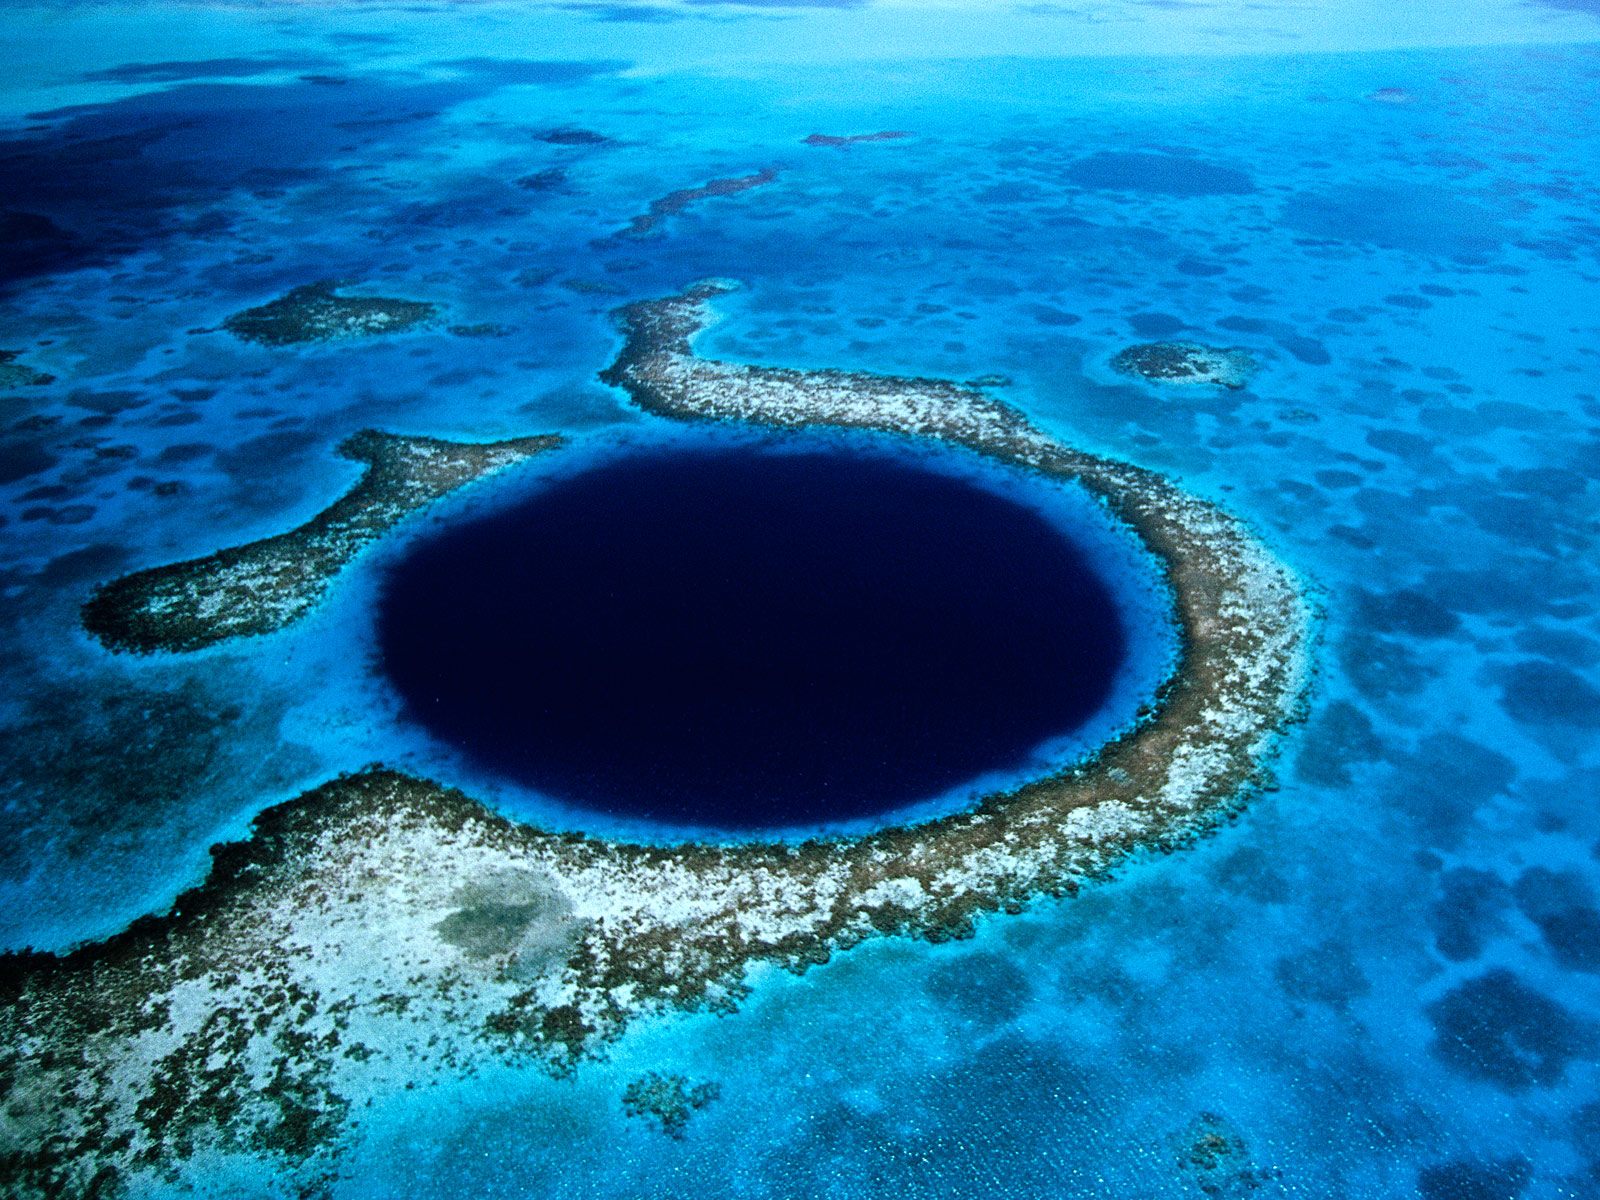 Flight Deal: Fly To Belize For As Low As $188 Round-Trip